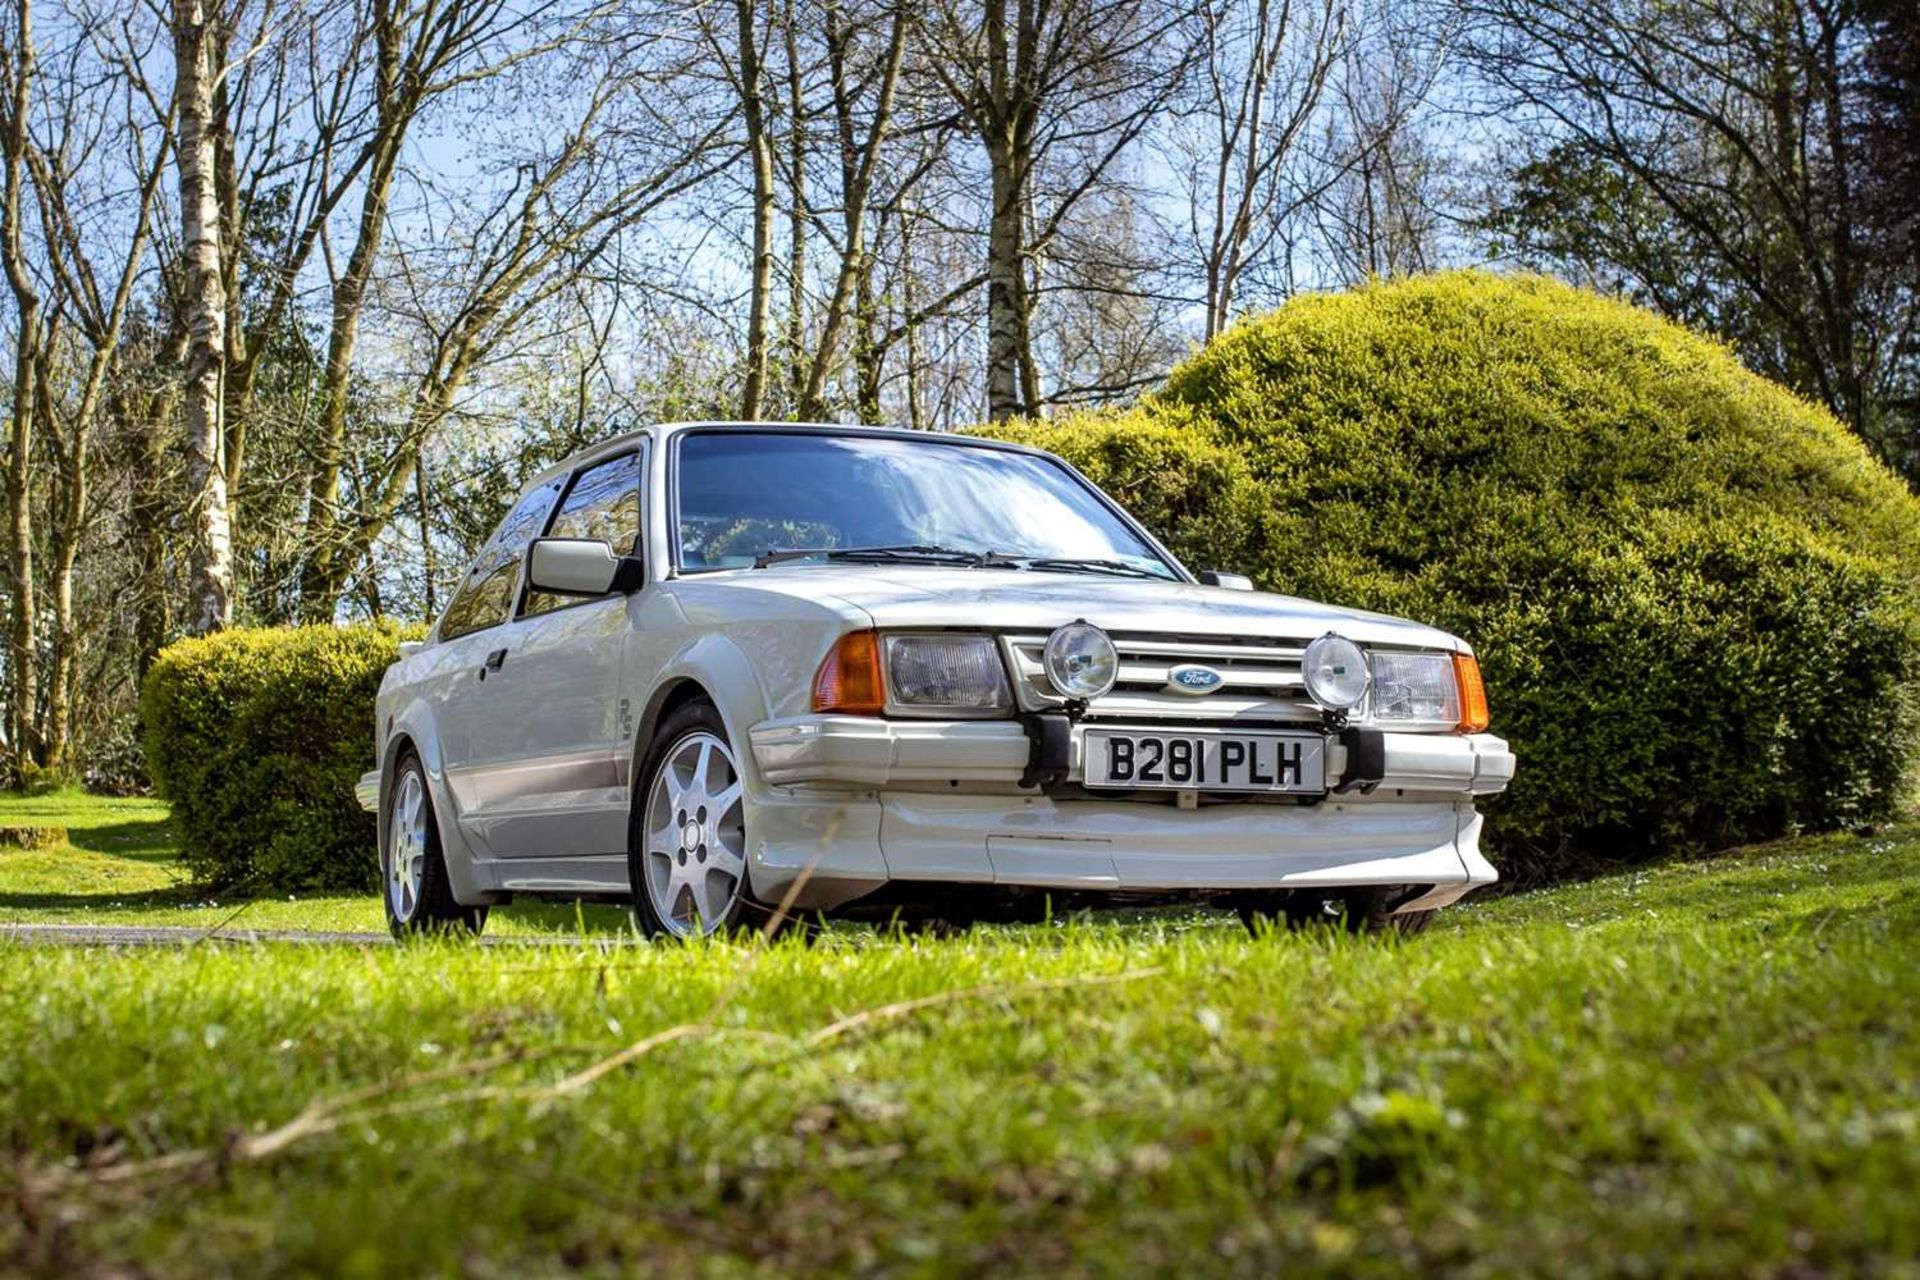 1985 Ford Escort RS Turbo S1 Subject to a full restoration  - Image 3 of 76